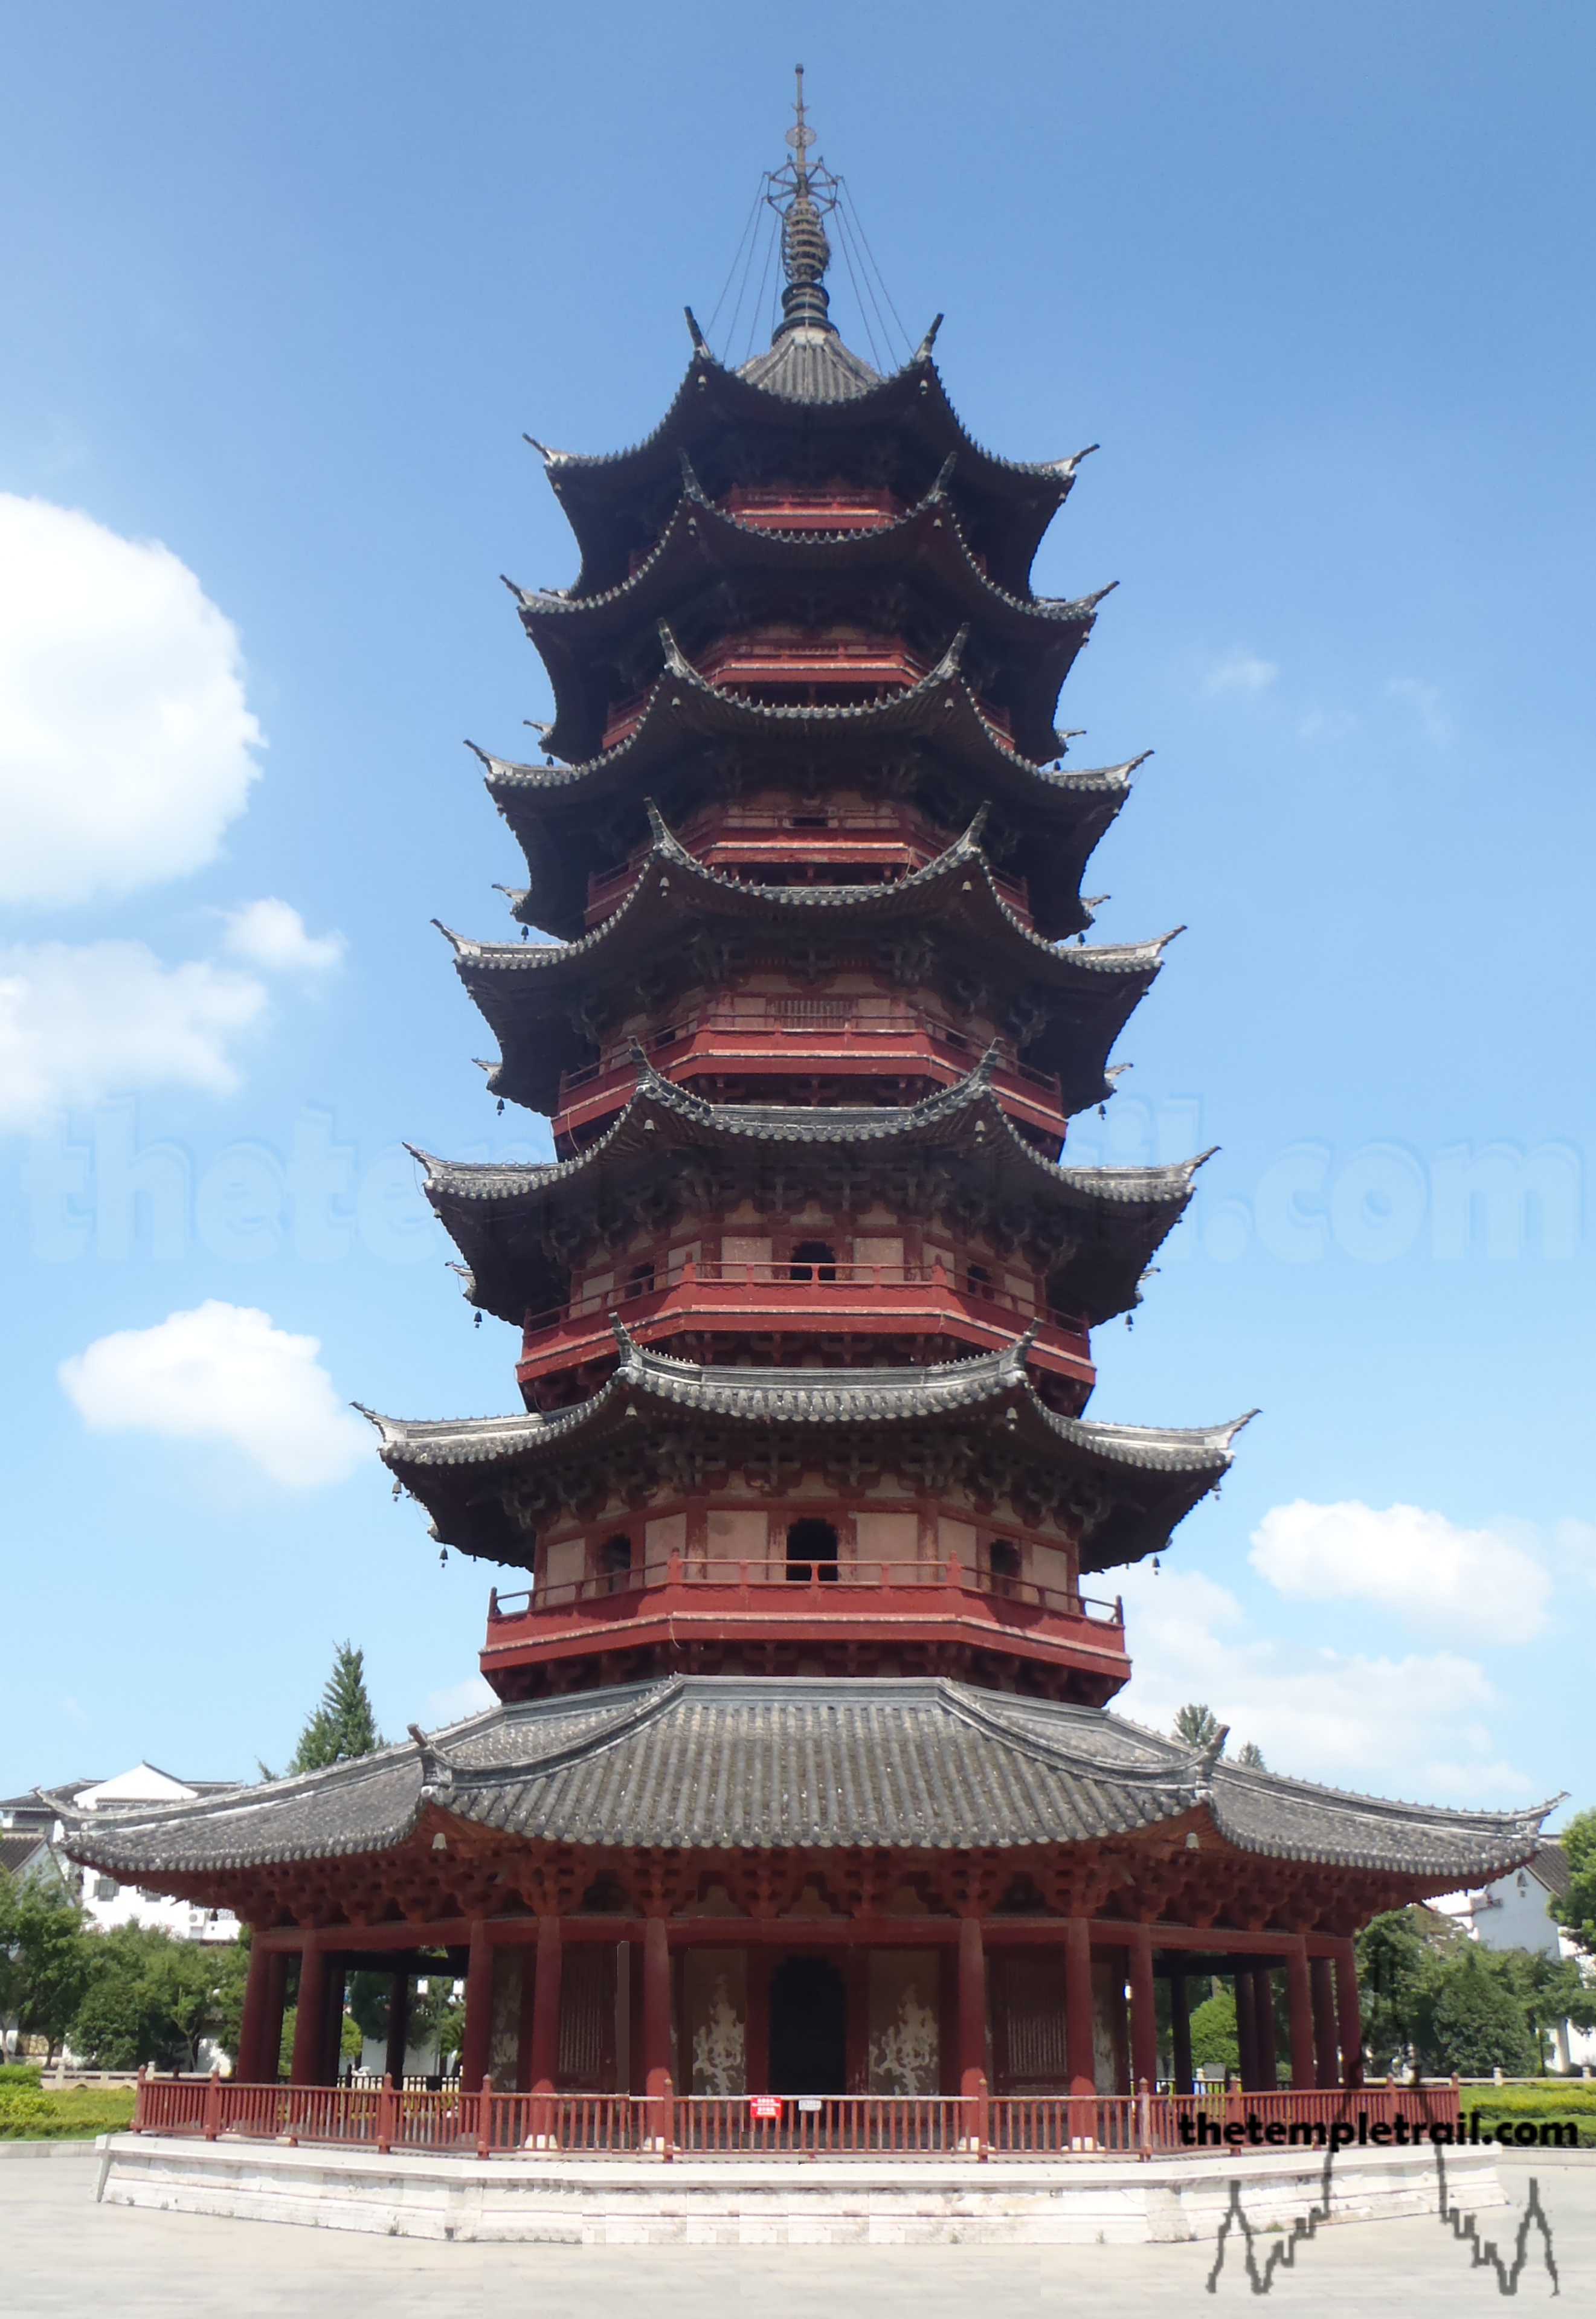 Chinese Buddhist Temples 101 | The Temple Trail